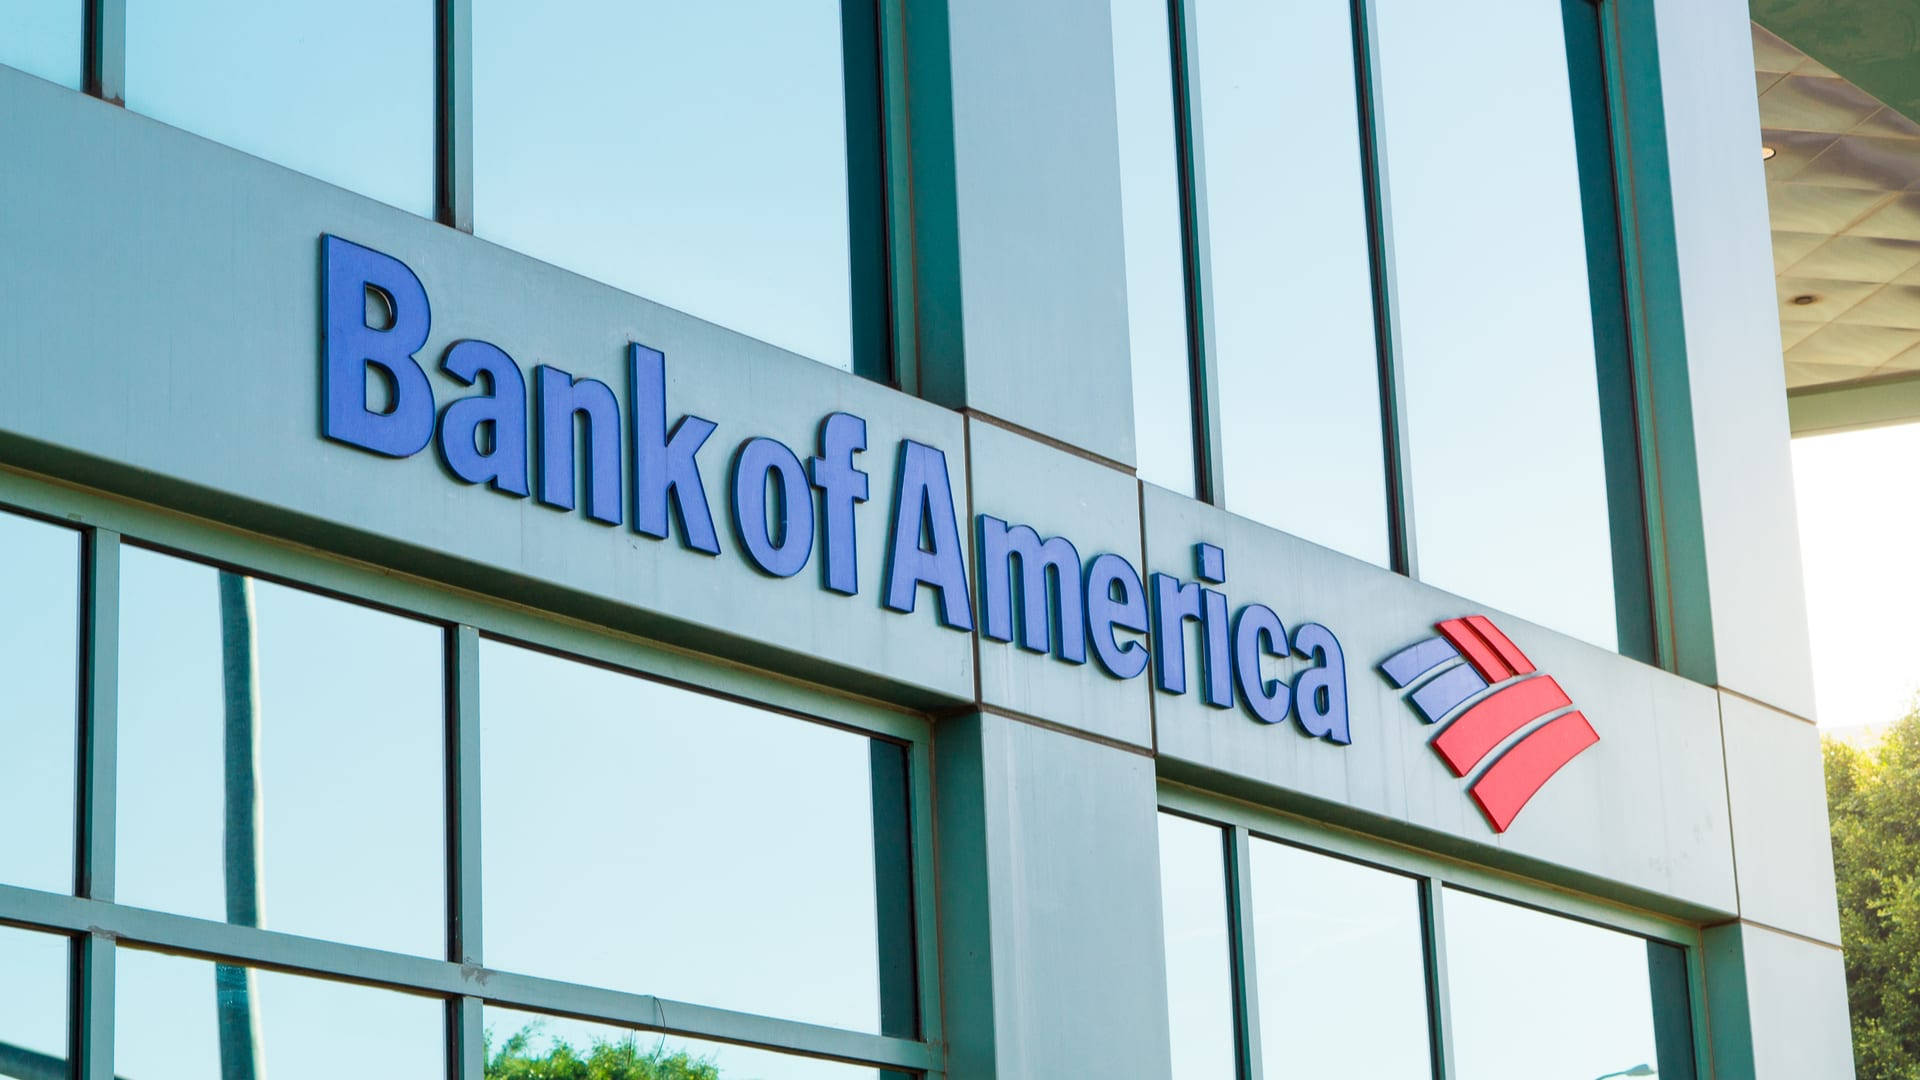 Bright Bank Of America Signage Picture